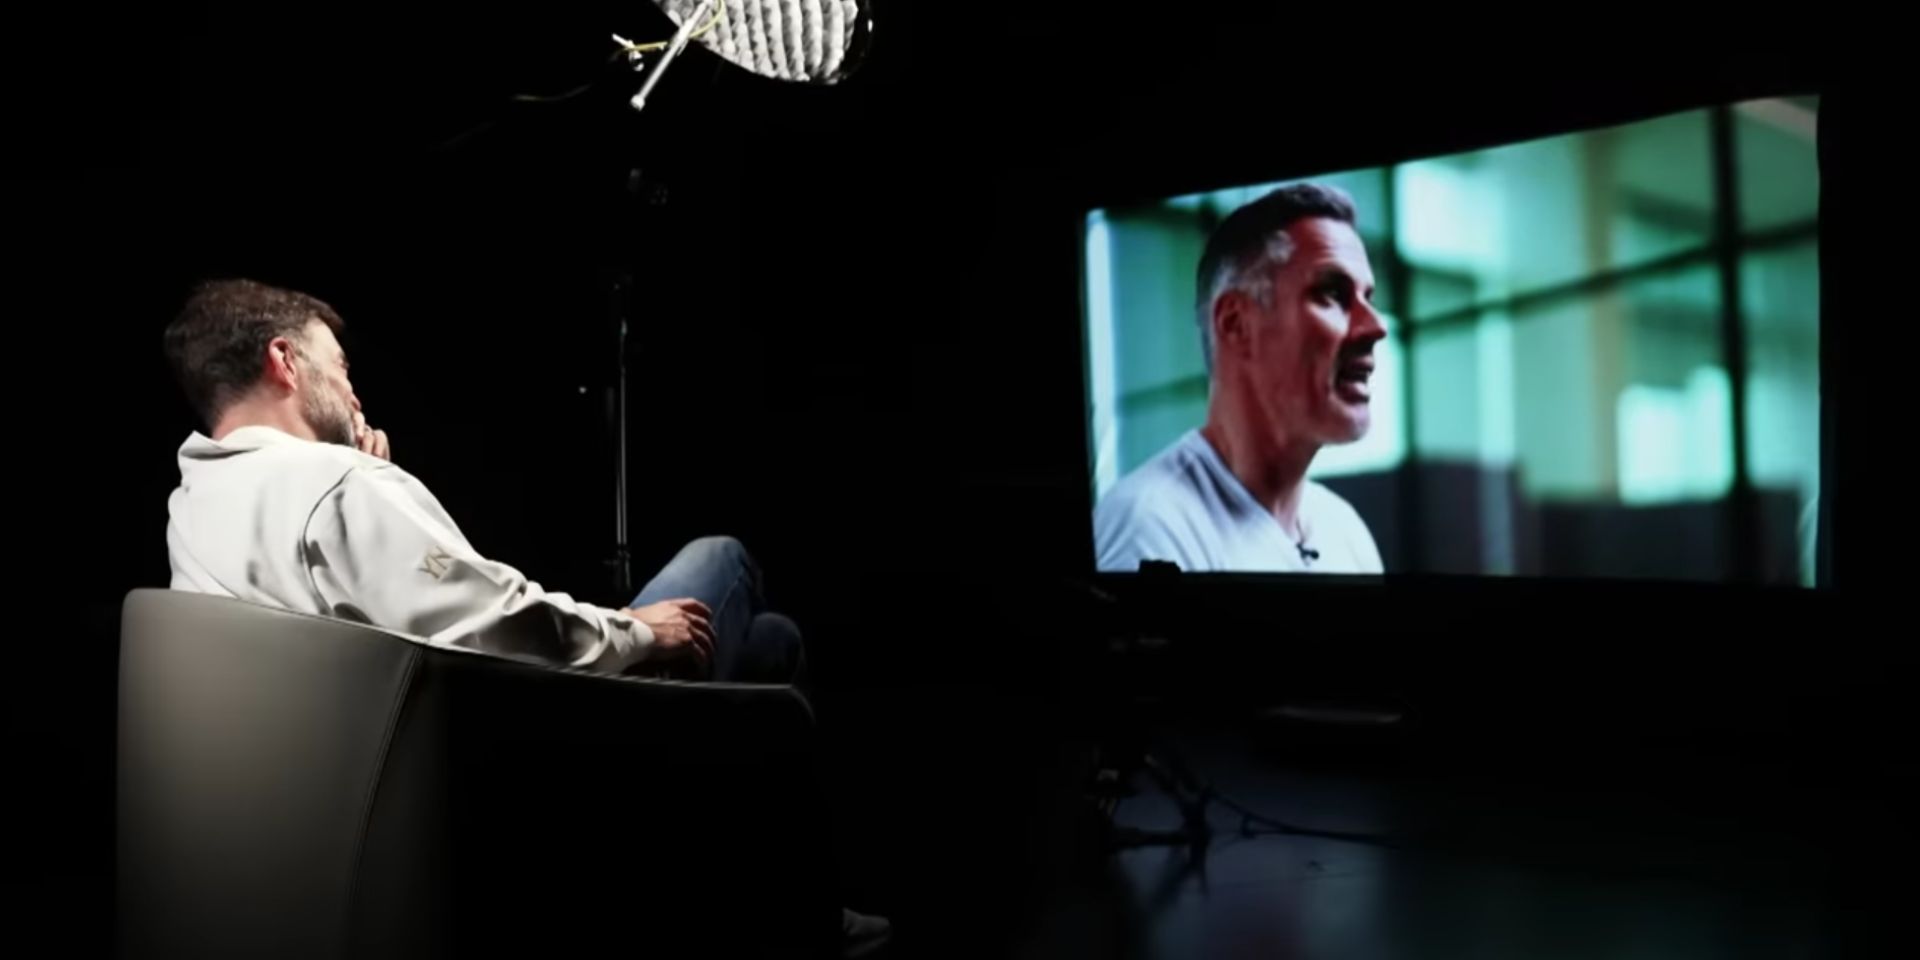 (Video) Carragher declares ‘Klopp is the Shankly of this era’ in fitting tribute